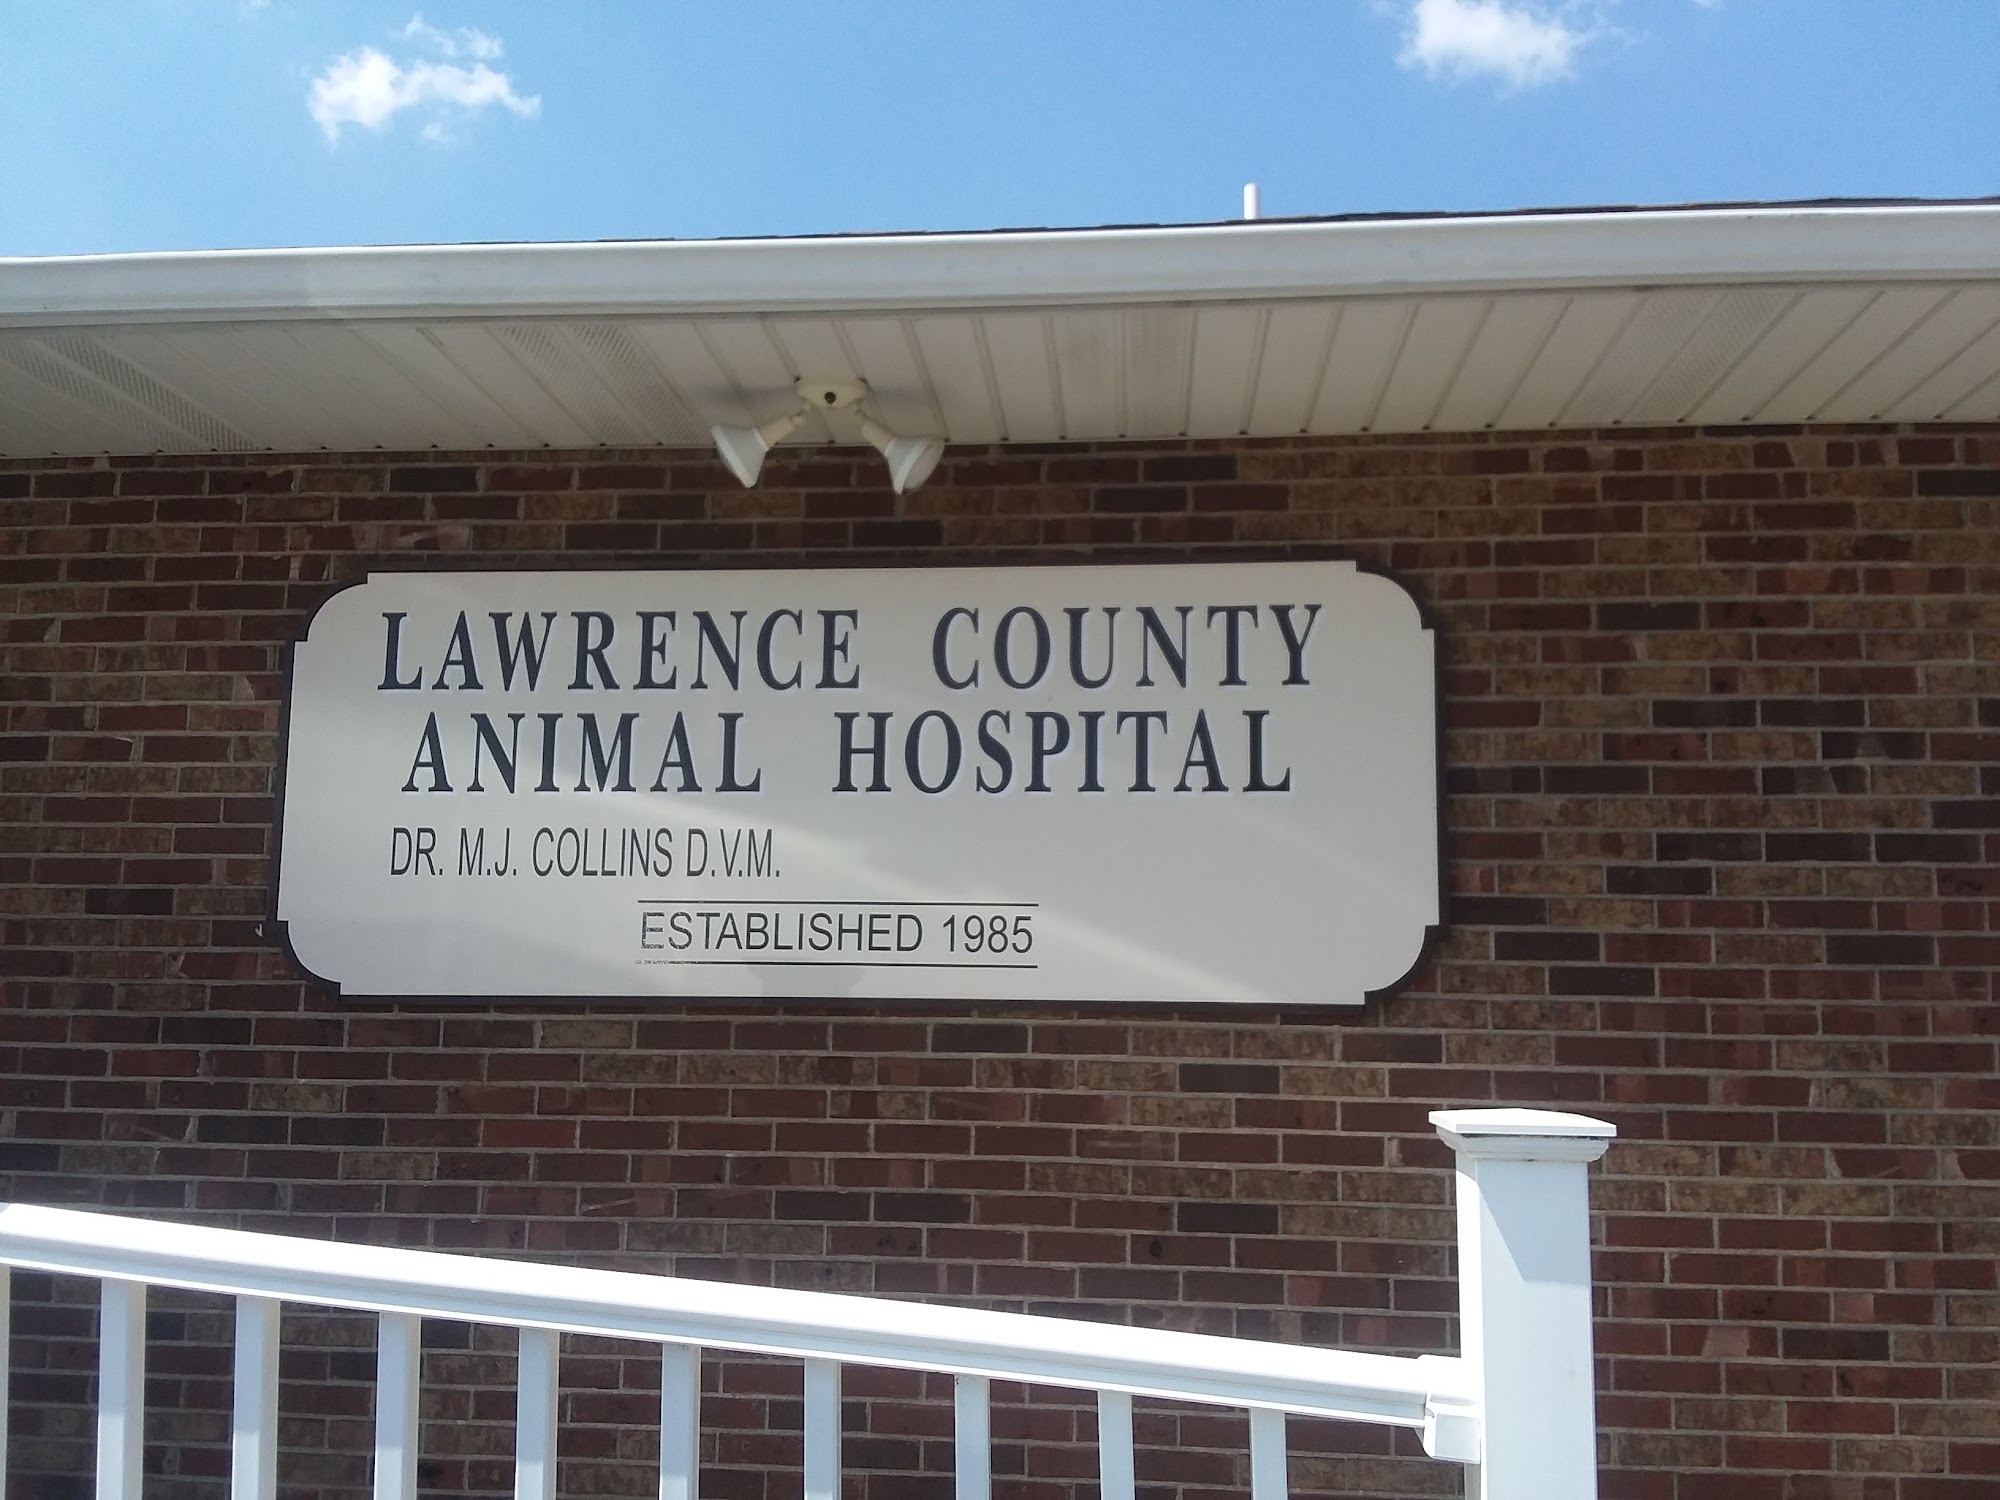 Lawrence County Animal Hospital 10689 Country Clb Rd, Lawrenceville Illinois 62439